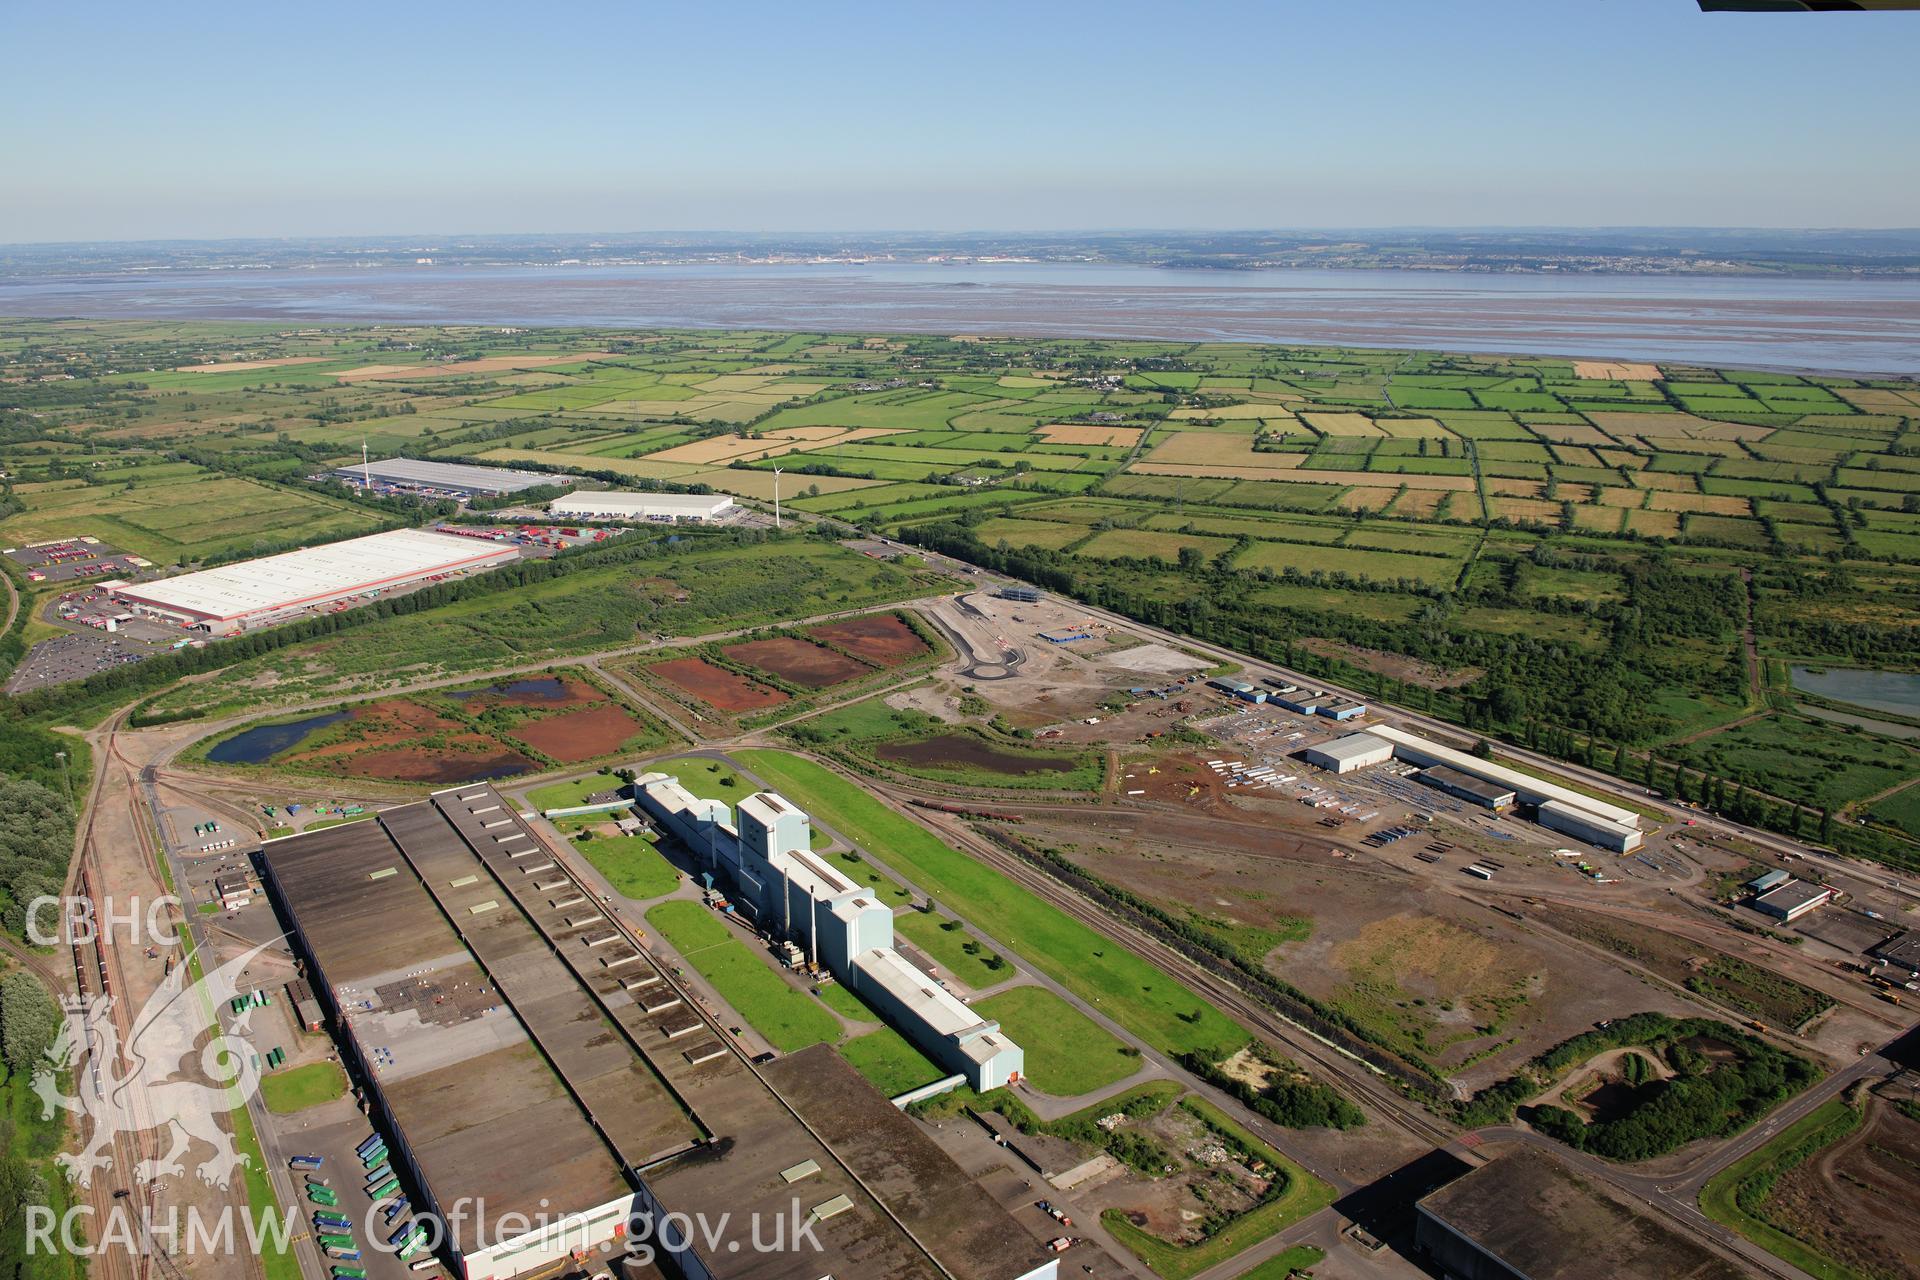 RCAHMW colour oblique photograph of Site of Llanwern Steelworks. Taken by Toby Driver on 24/07/2012.